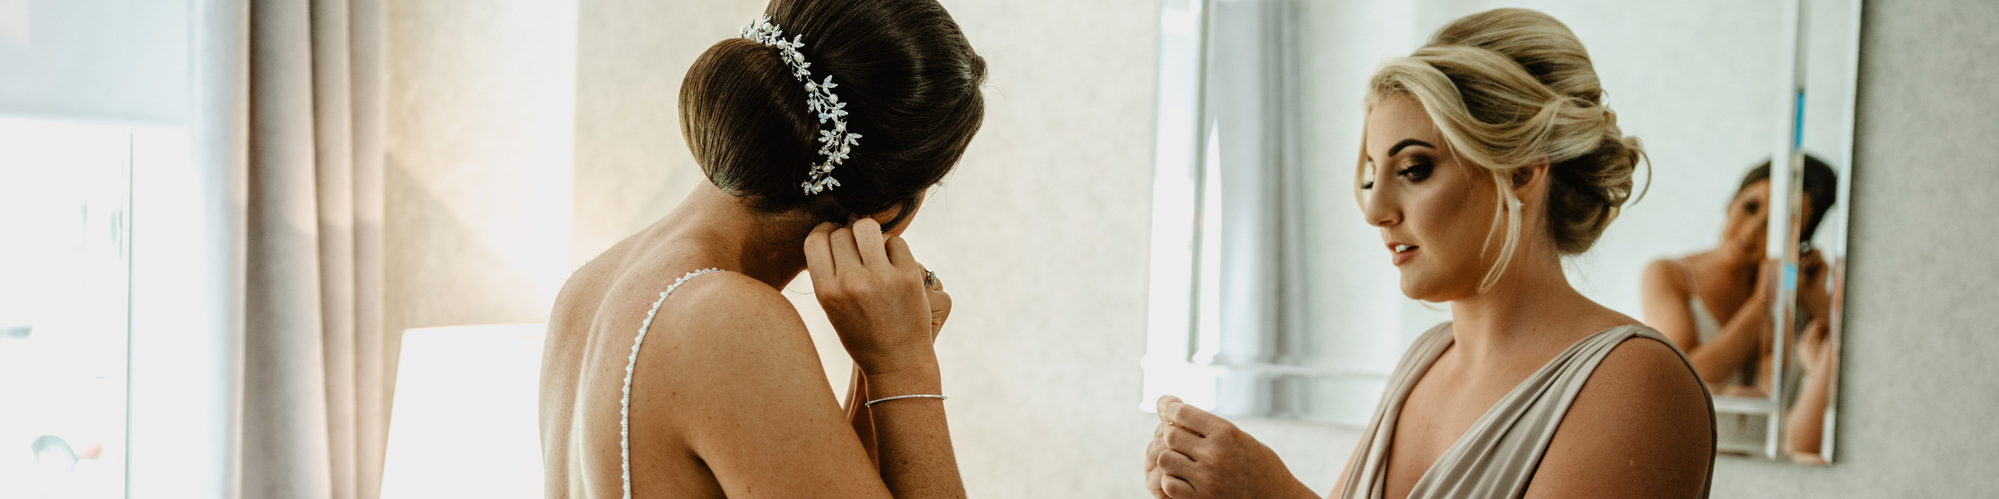 bride looking at herself in mirror putting on jewellery before ceremony